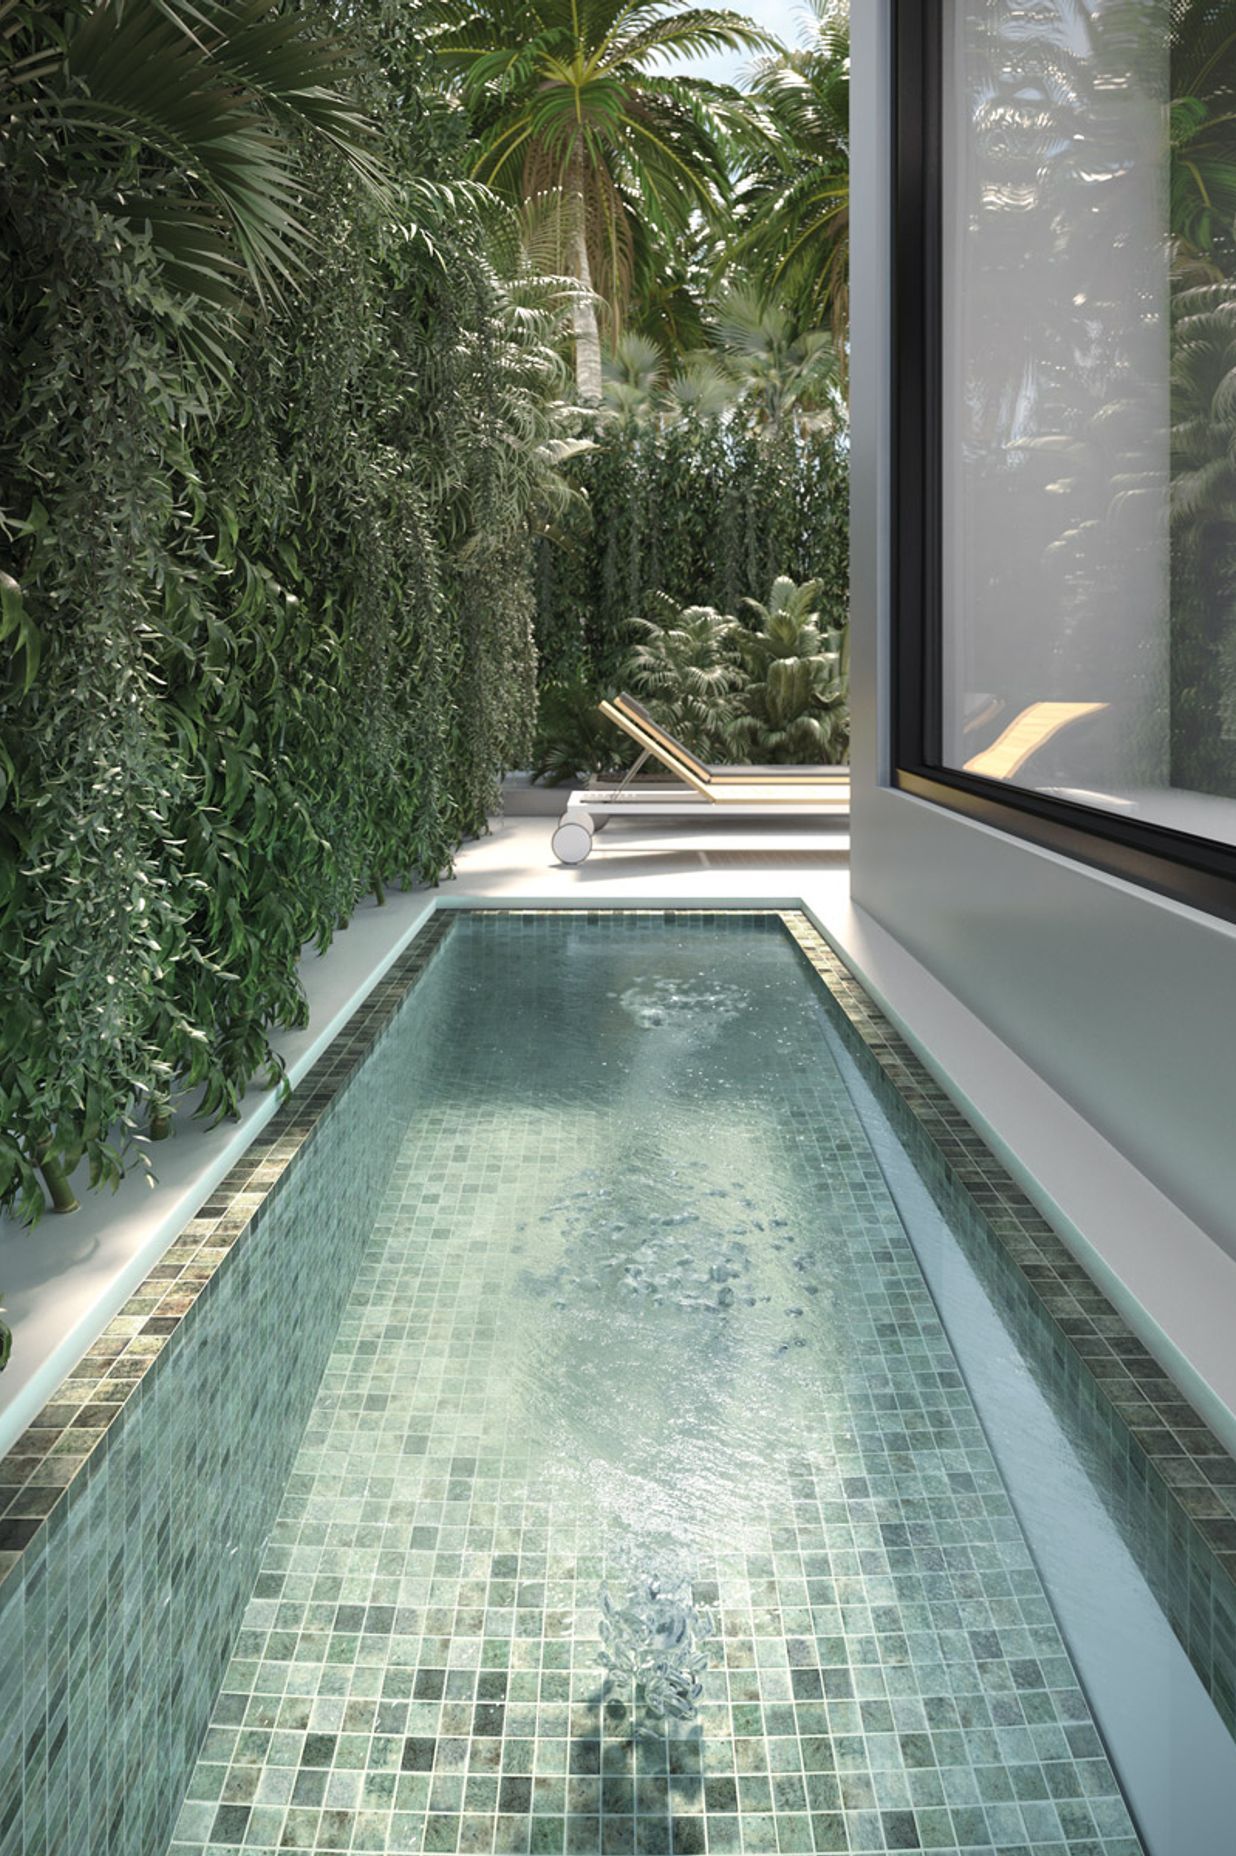 Tiles in shades of grey, brown and stone help create the visual effect of crystal-clear water in this swimming pool.
